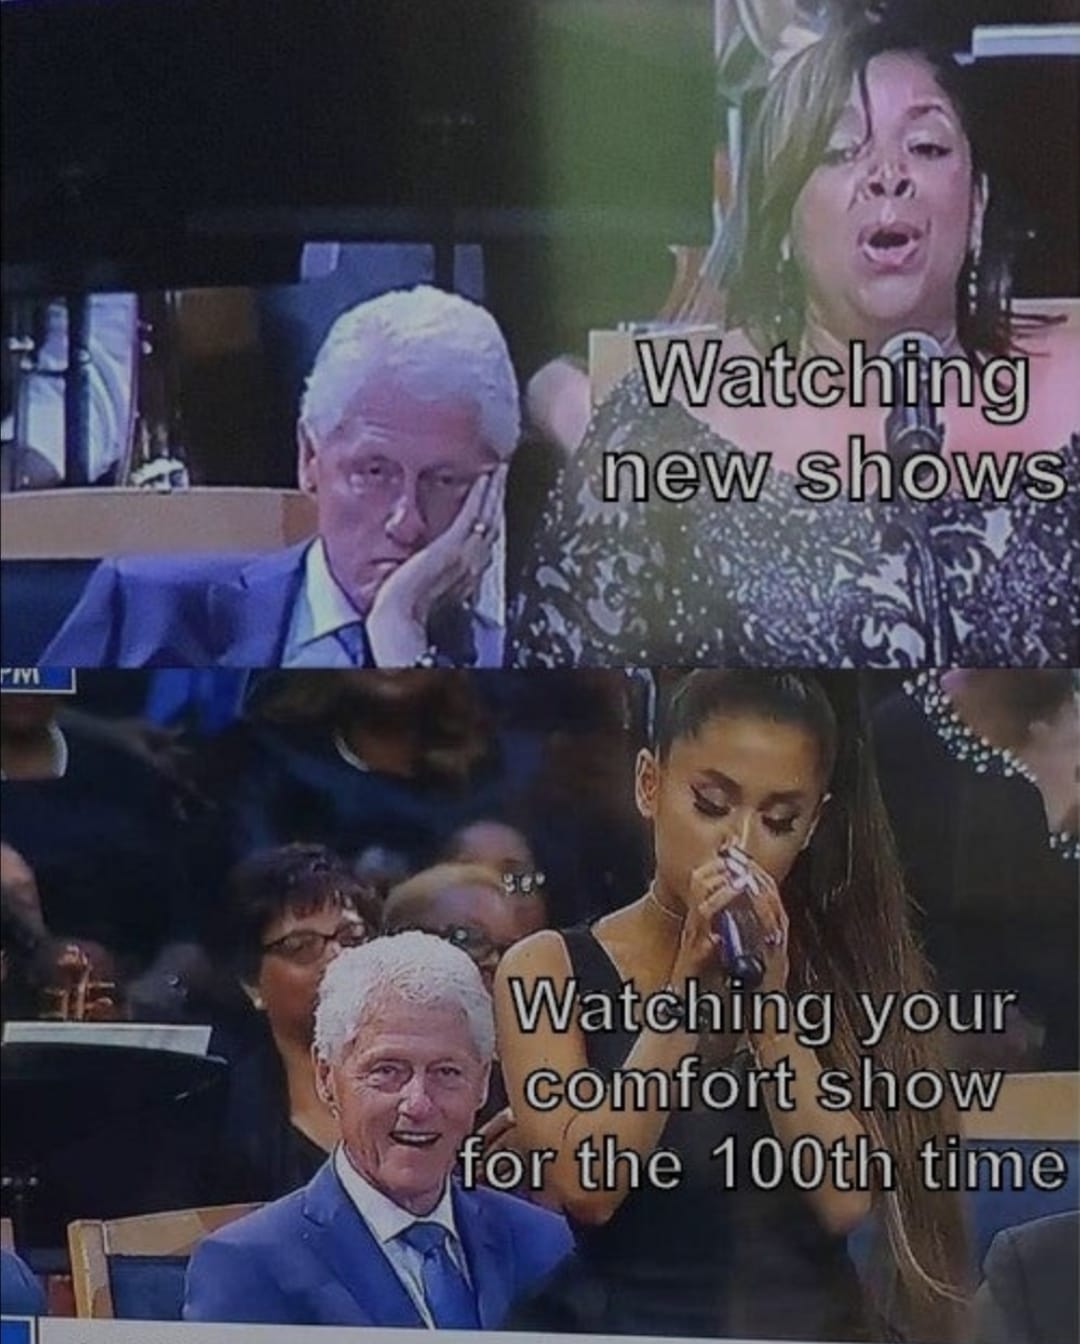 bill clinton meme template - Watching new shows Iyi Watching your comfort show for the 100th time